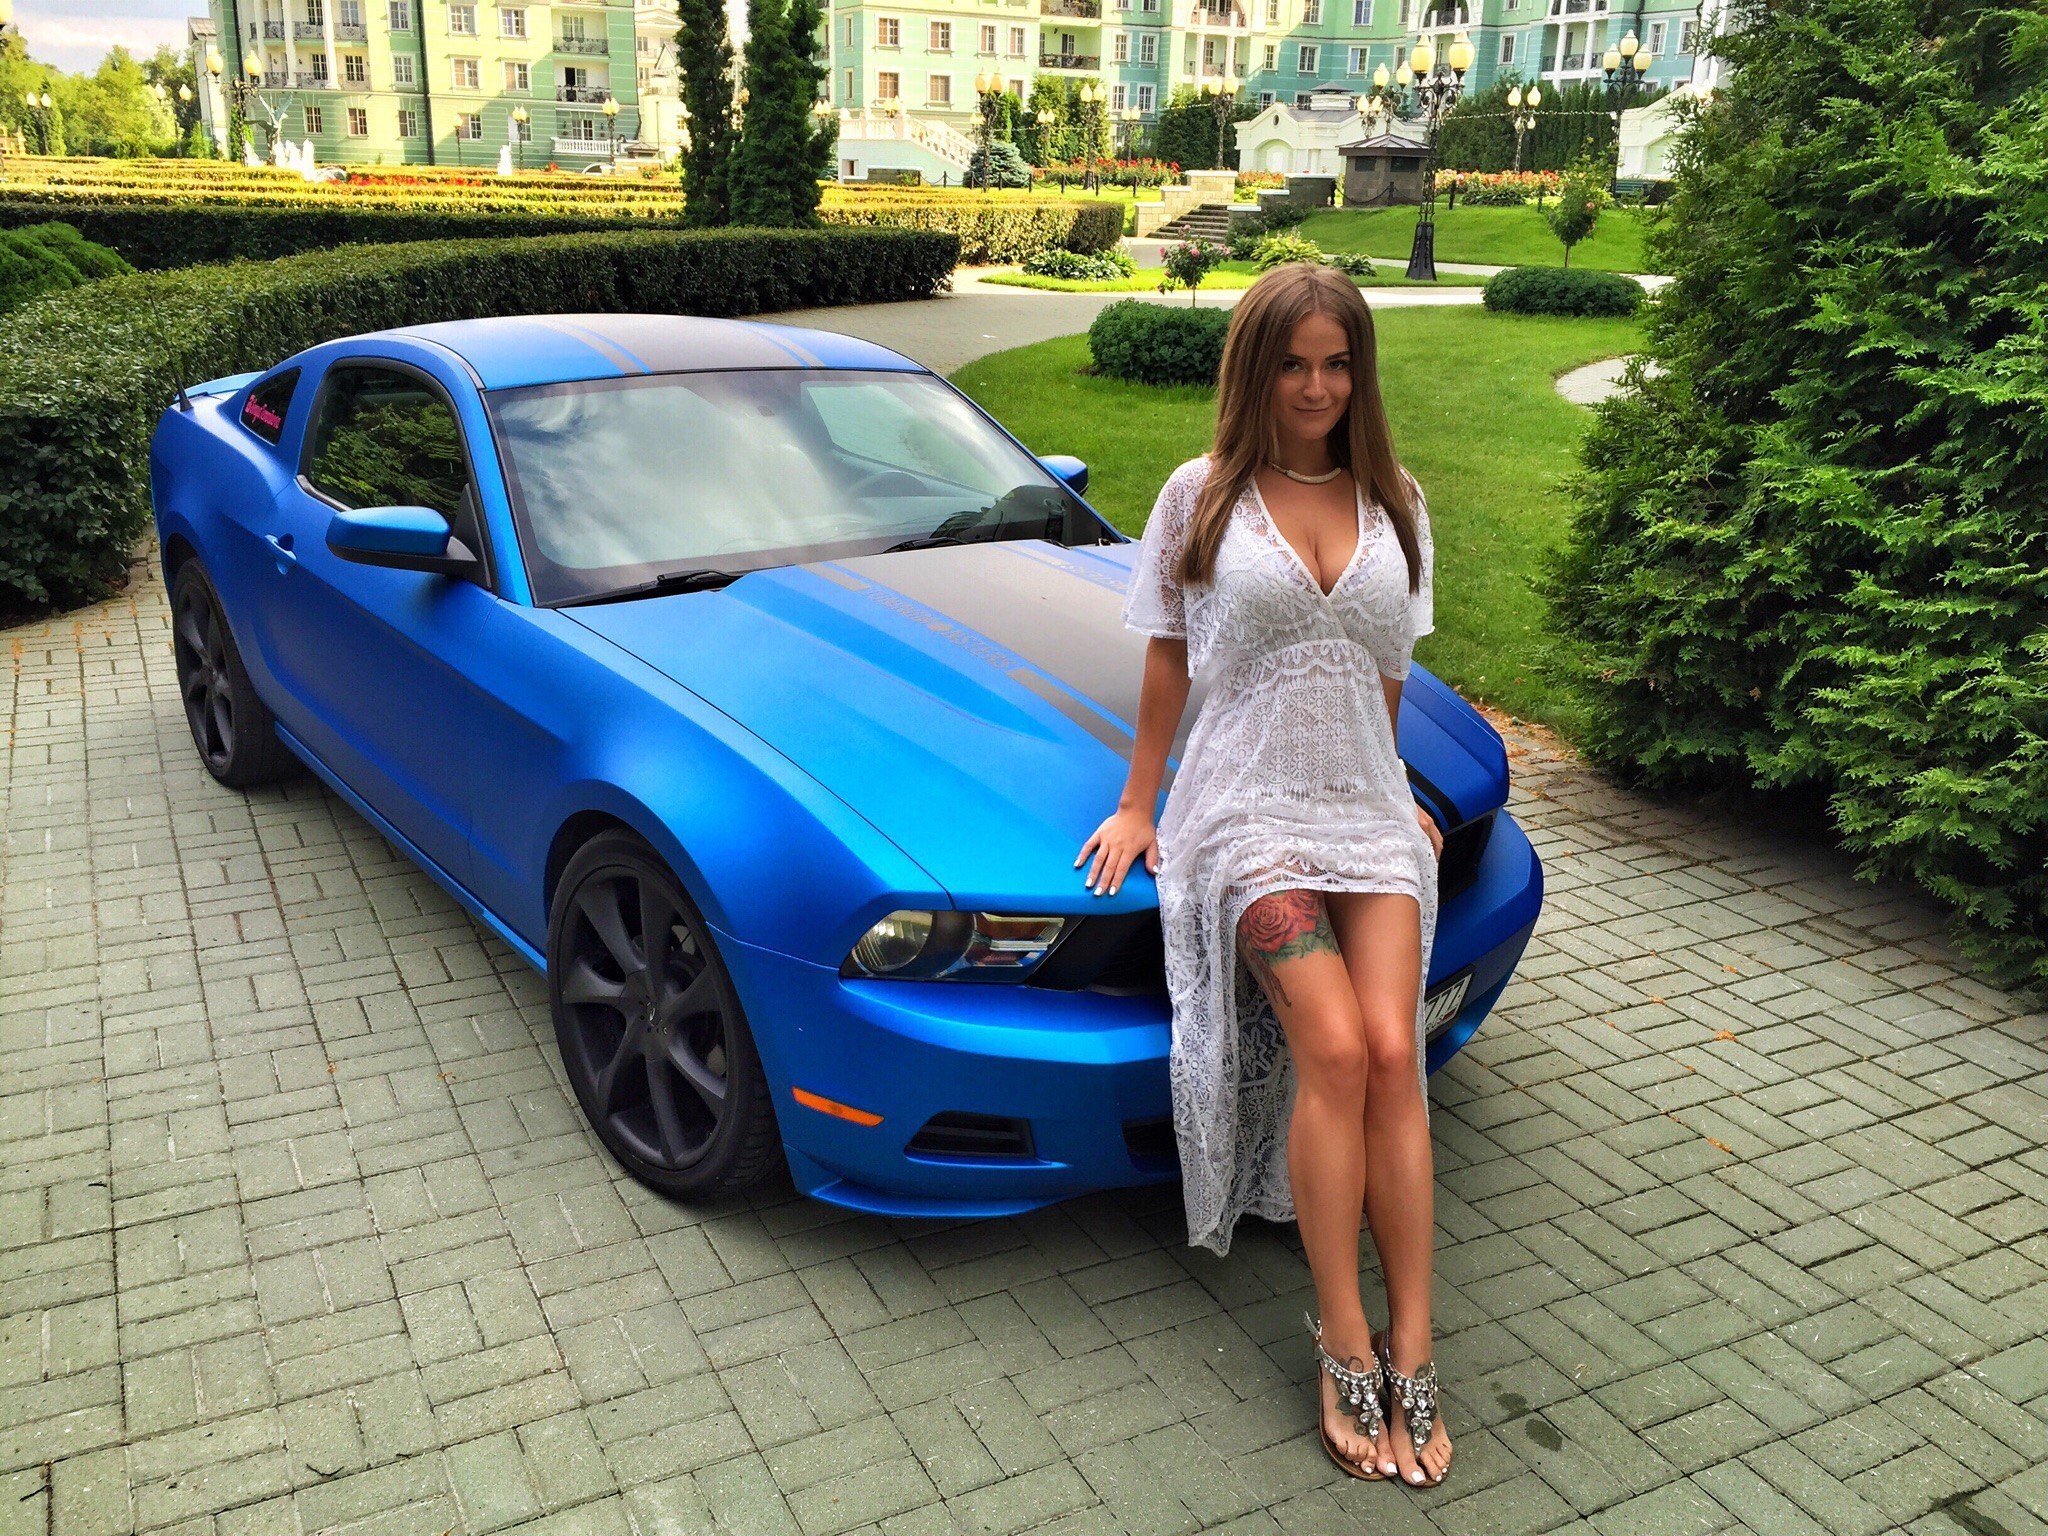 People 2048x1536 blue Ford Mustang Shelby muscle cars women big boobs legs tattoo women with cars white dress racing stripes Ford Mustang S-197 II Ford car vehicle blue cars inked girls park women outdoors American cars